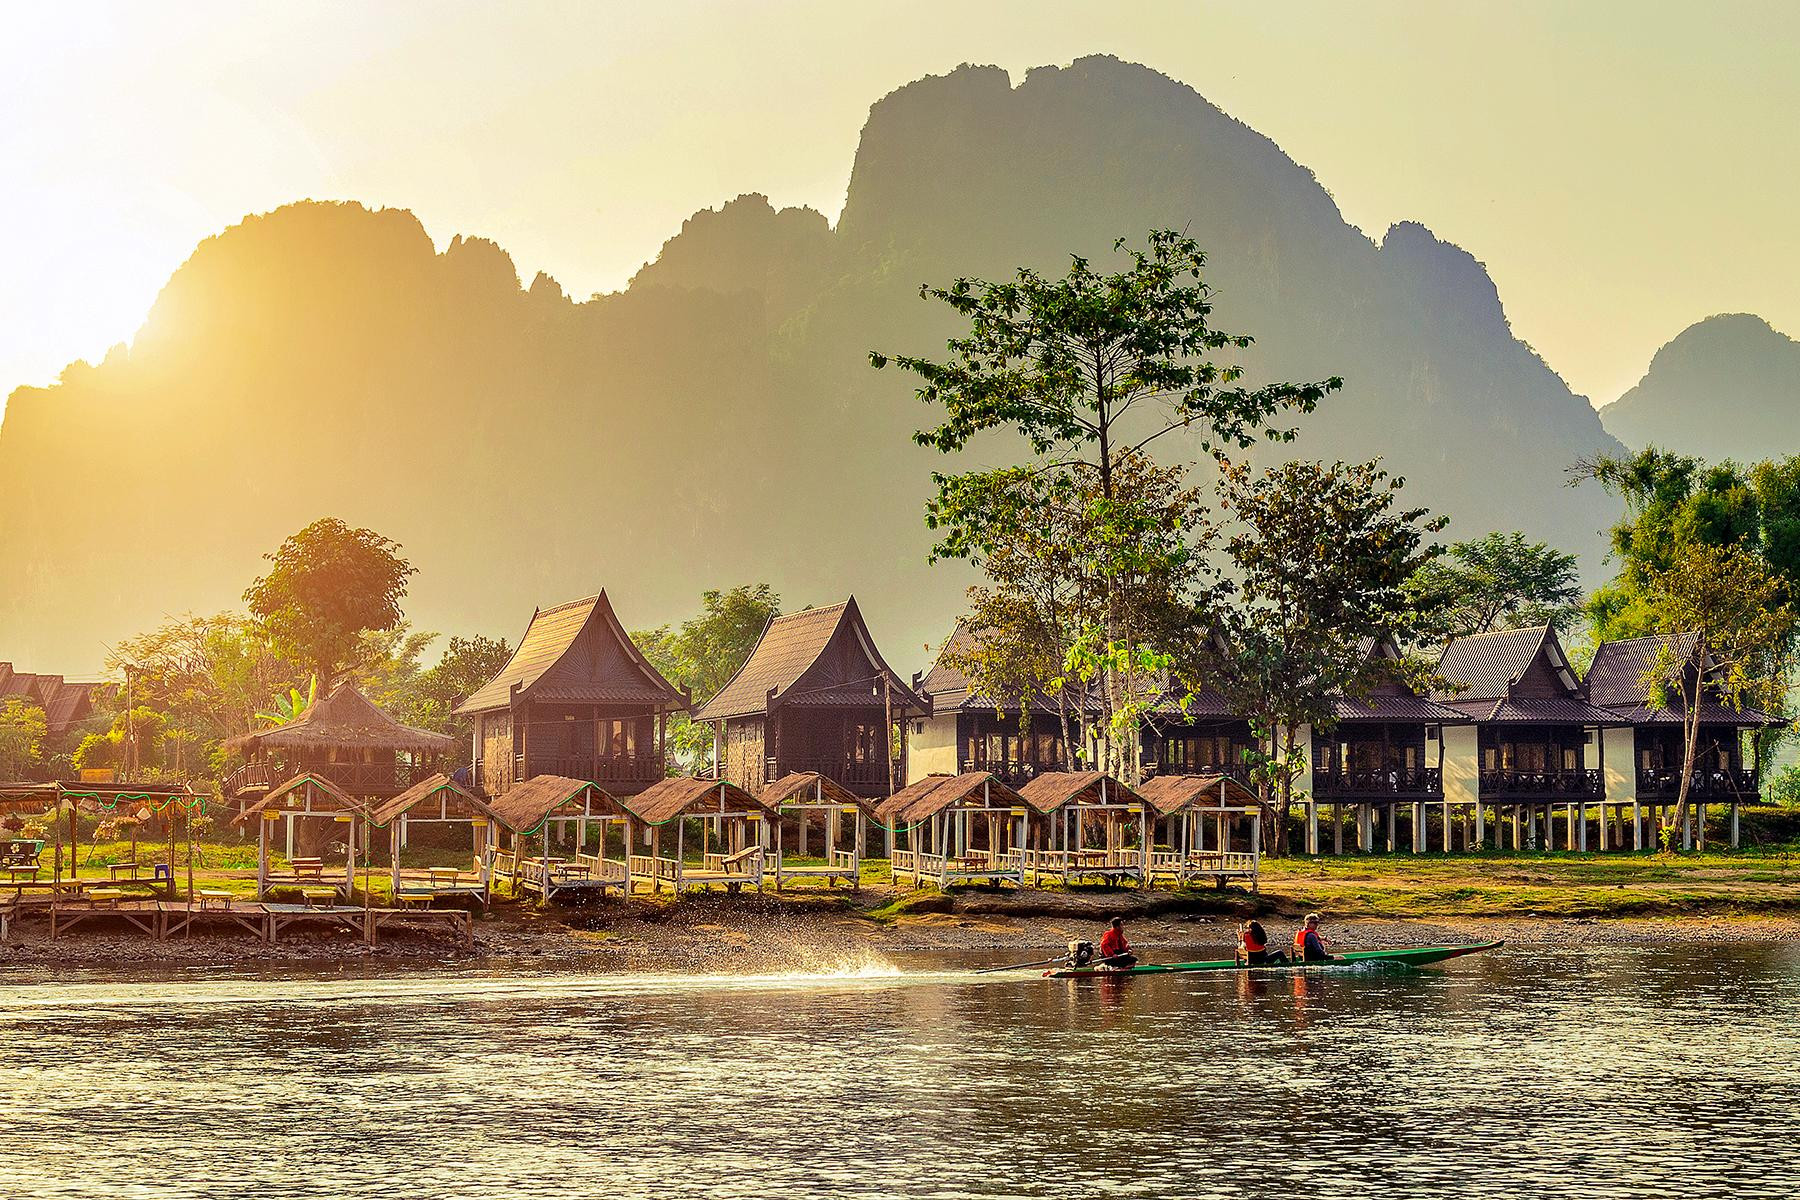 Ten incredible facts about Laos